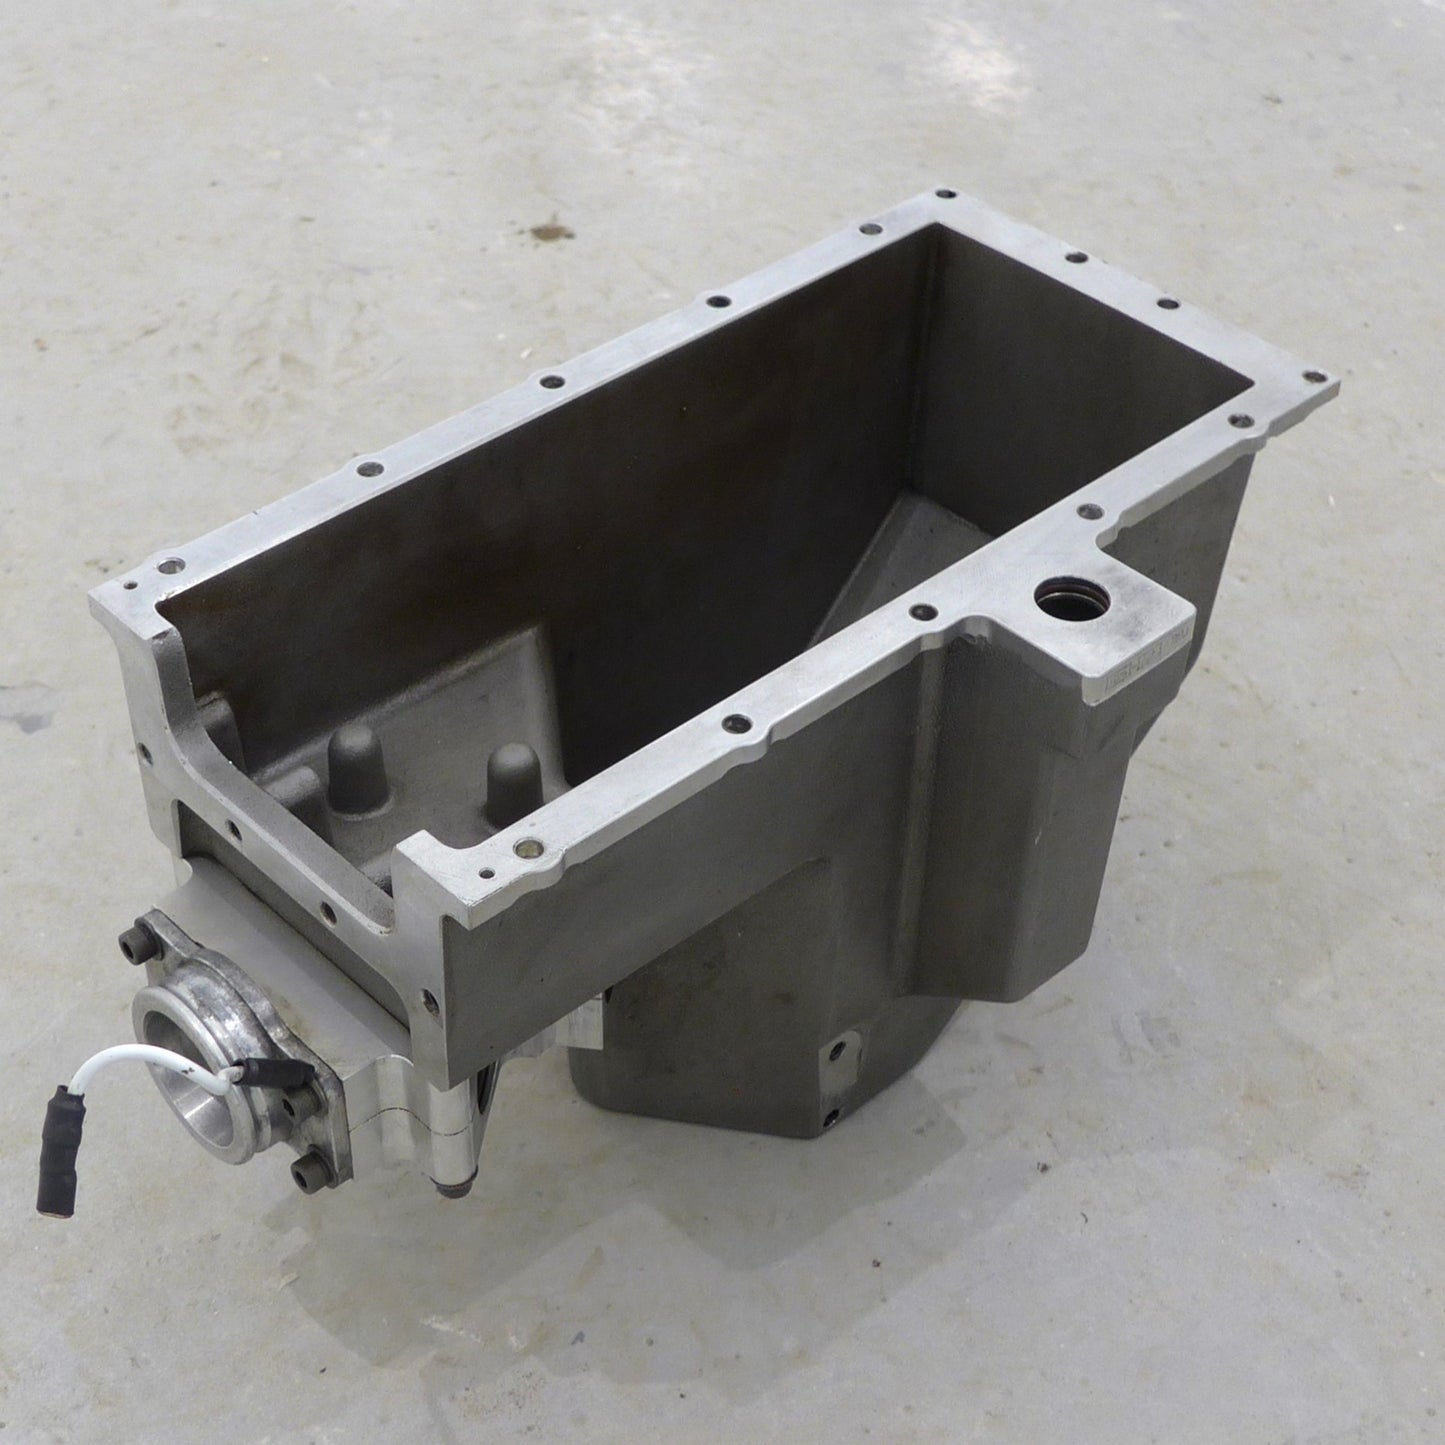 Sump Machined Large Capacity - J2200 (A/R)